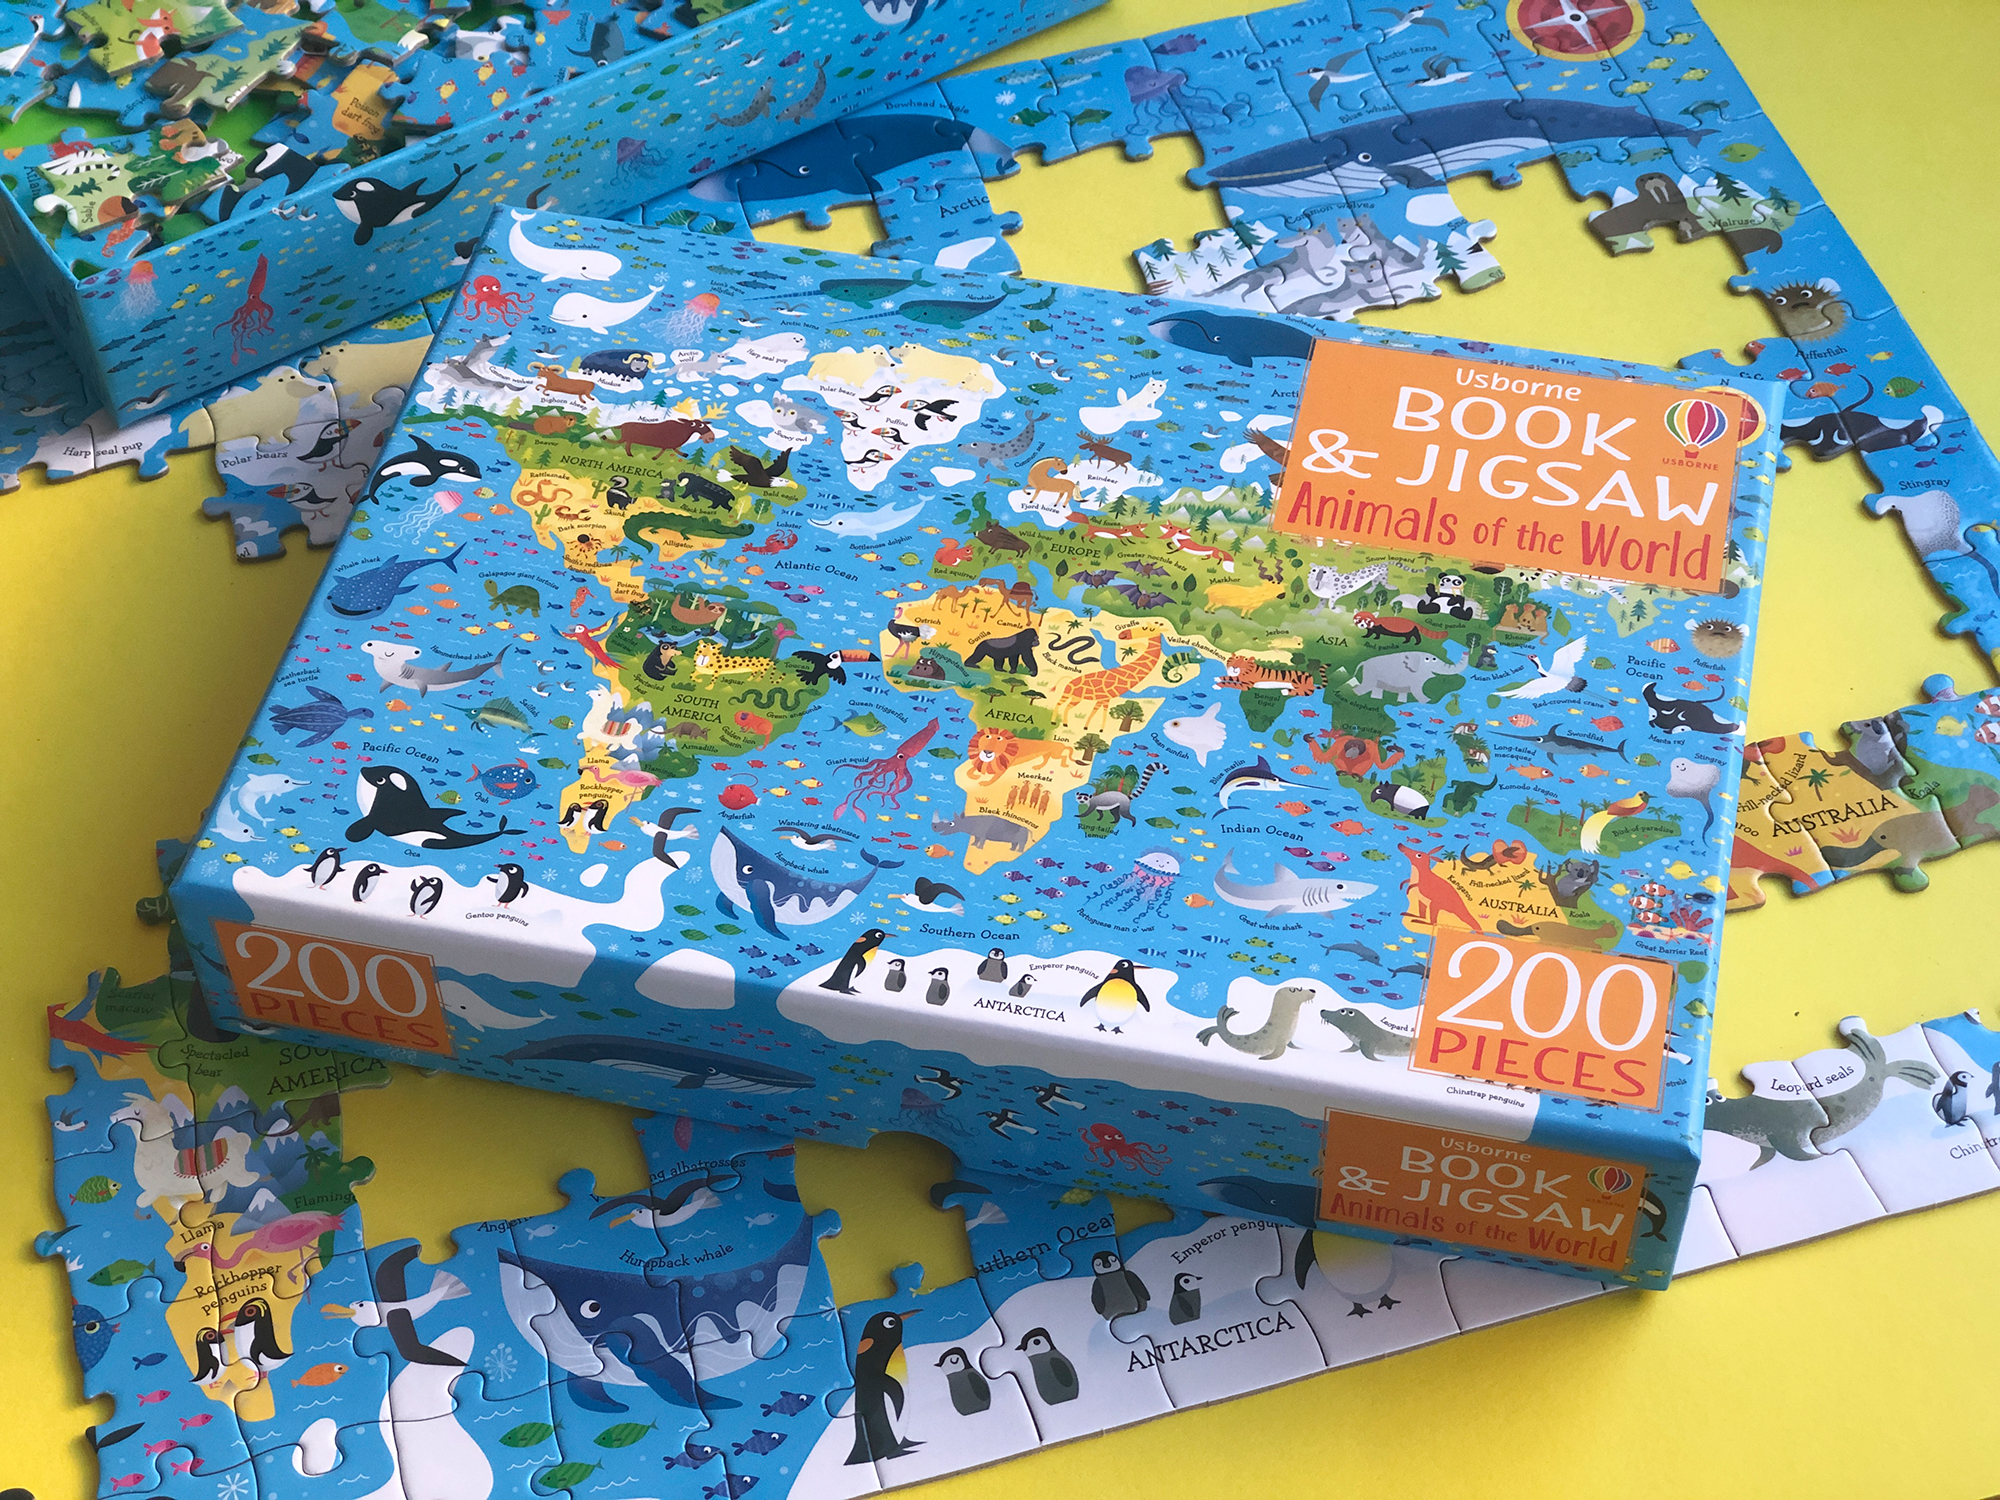 Jigsaws are a great way to learn about the world